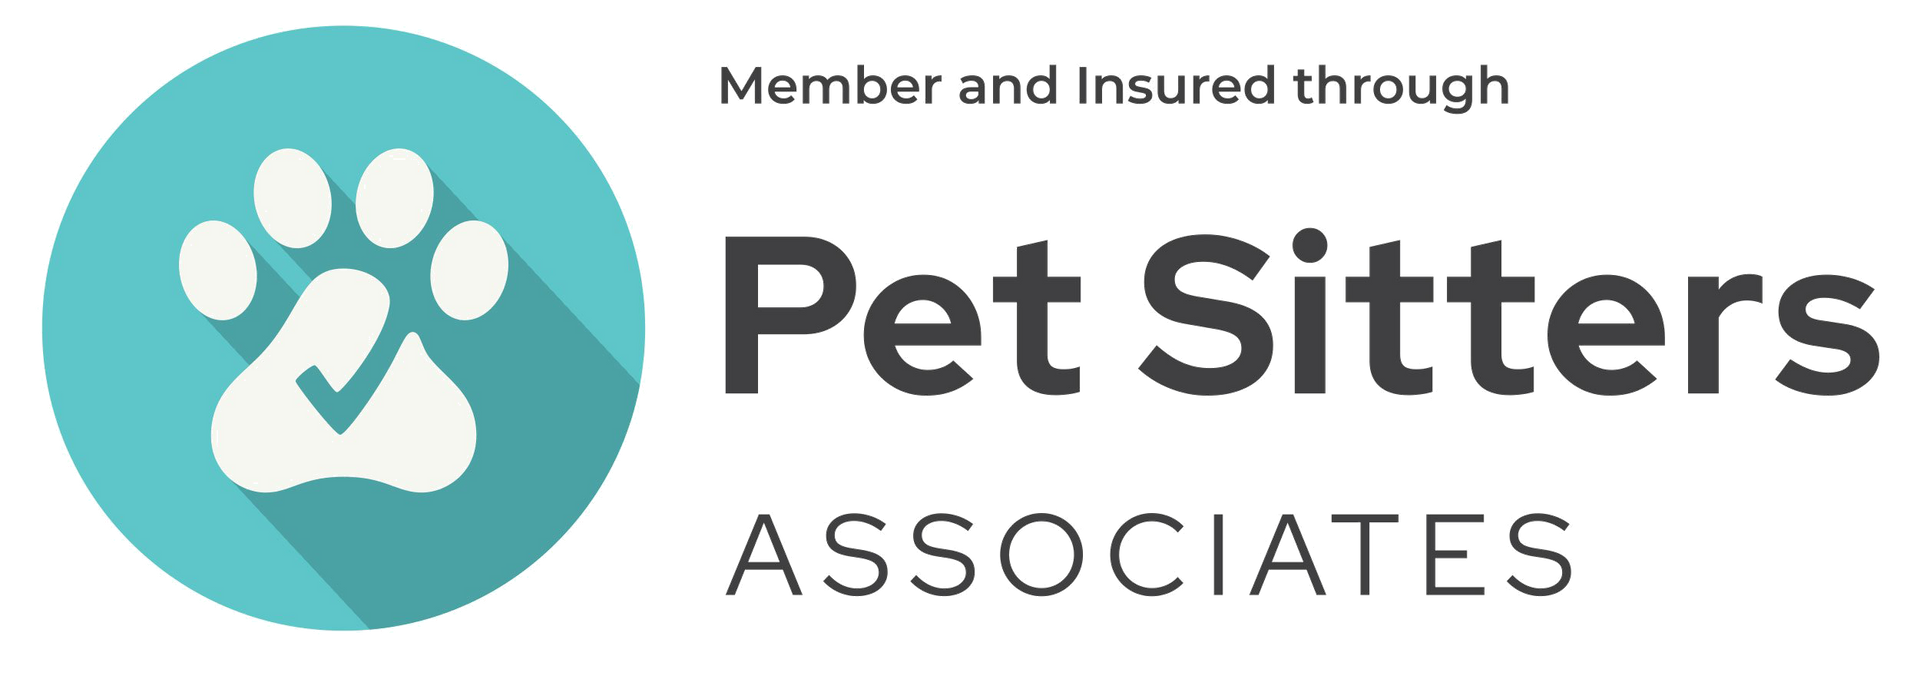 The logo for pet sitters associates is a blue circle with a paw print on it.